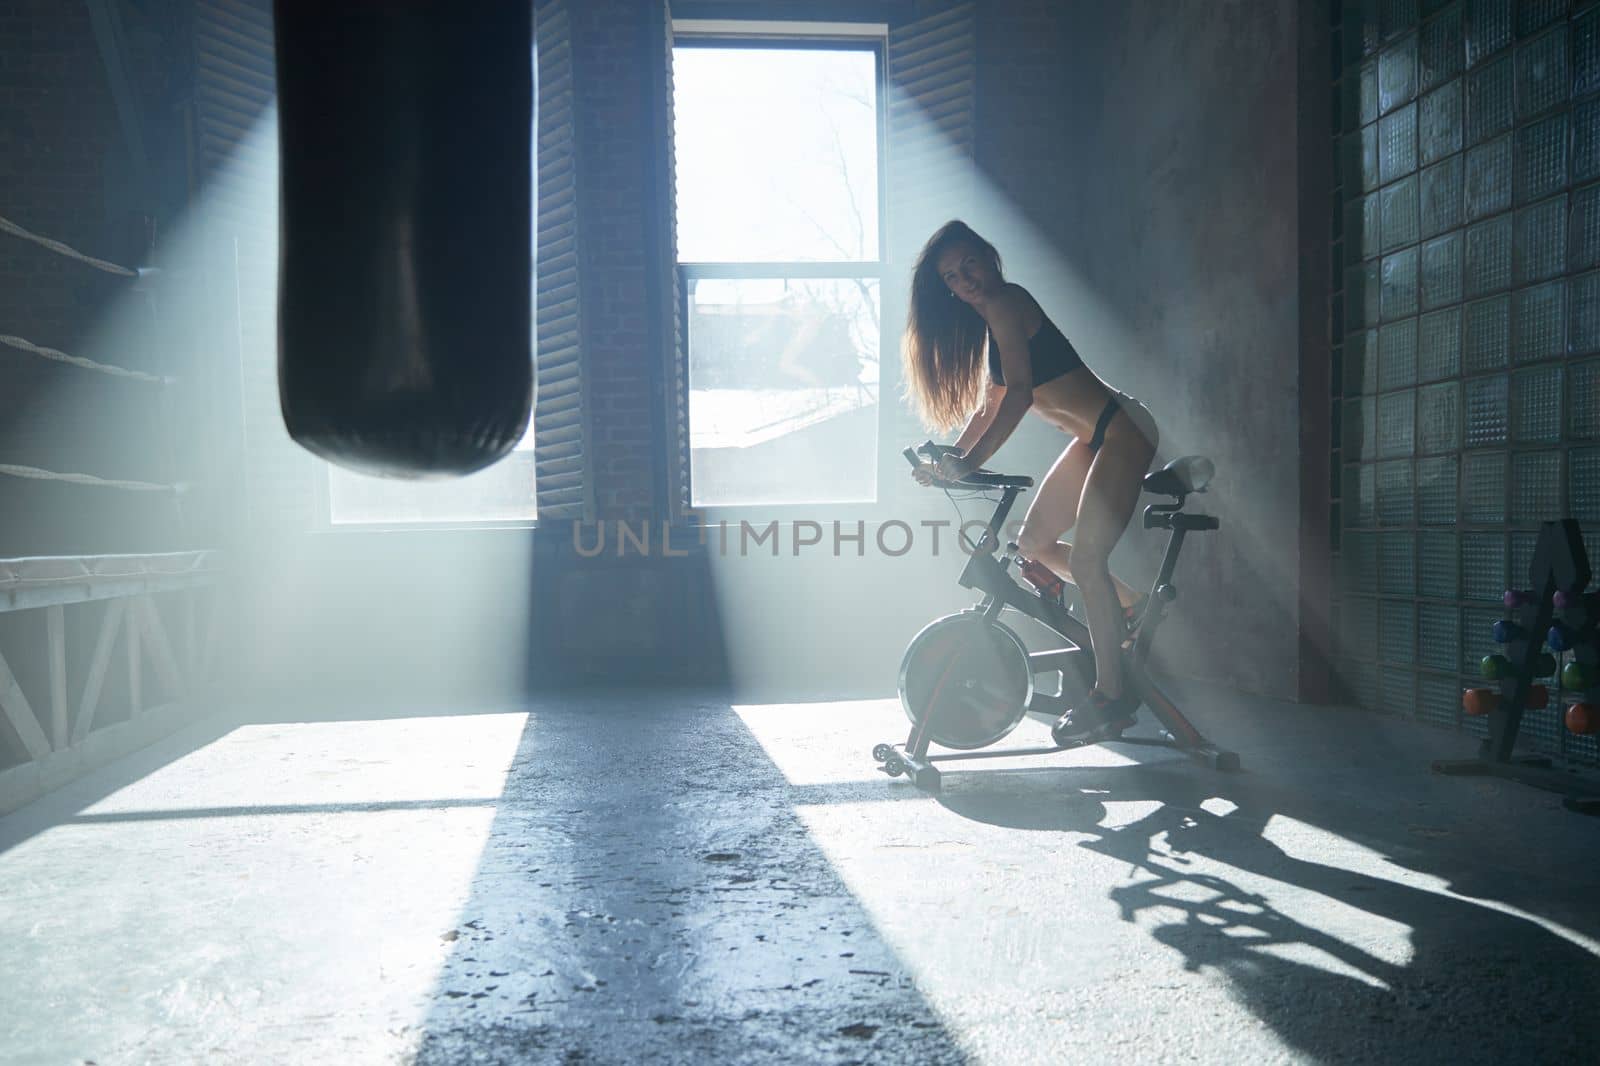 The beautiful fitness girl with a sport body twists bicycle pedals in gym, large loft-style room, beautiful light from windows, sun beams, the stationary exercise machine the bicycle. High quality photo